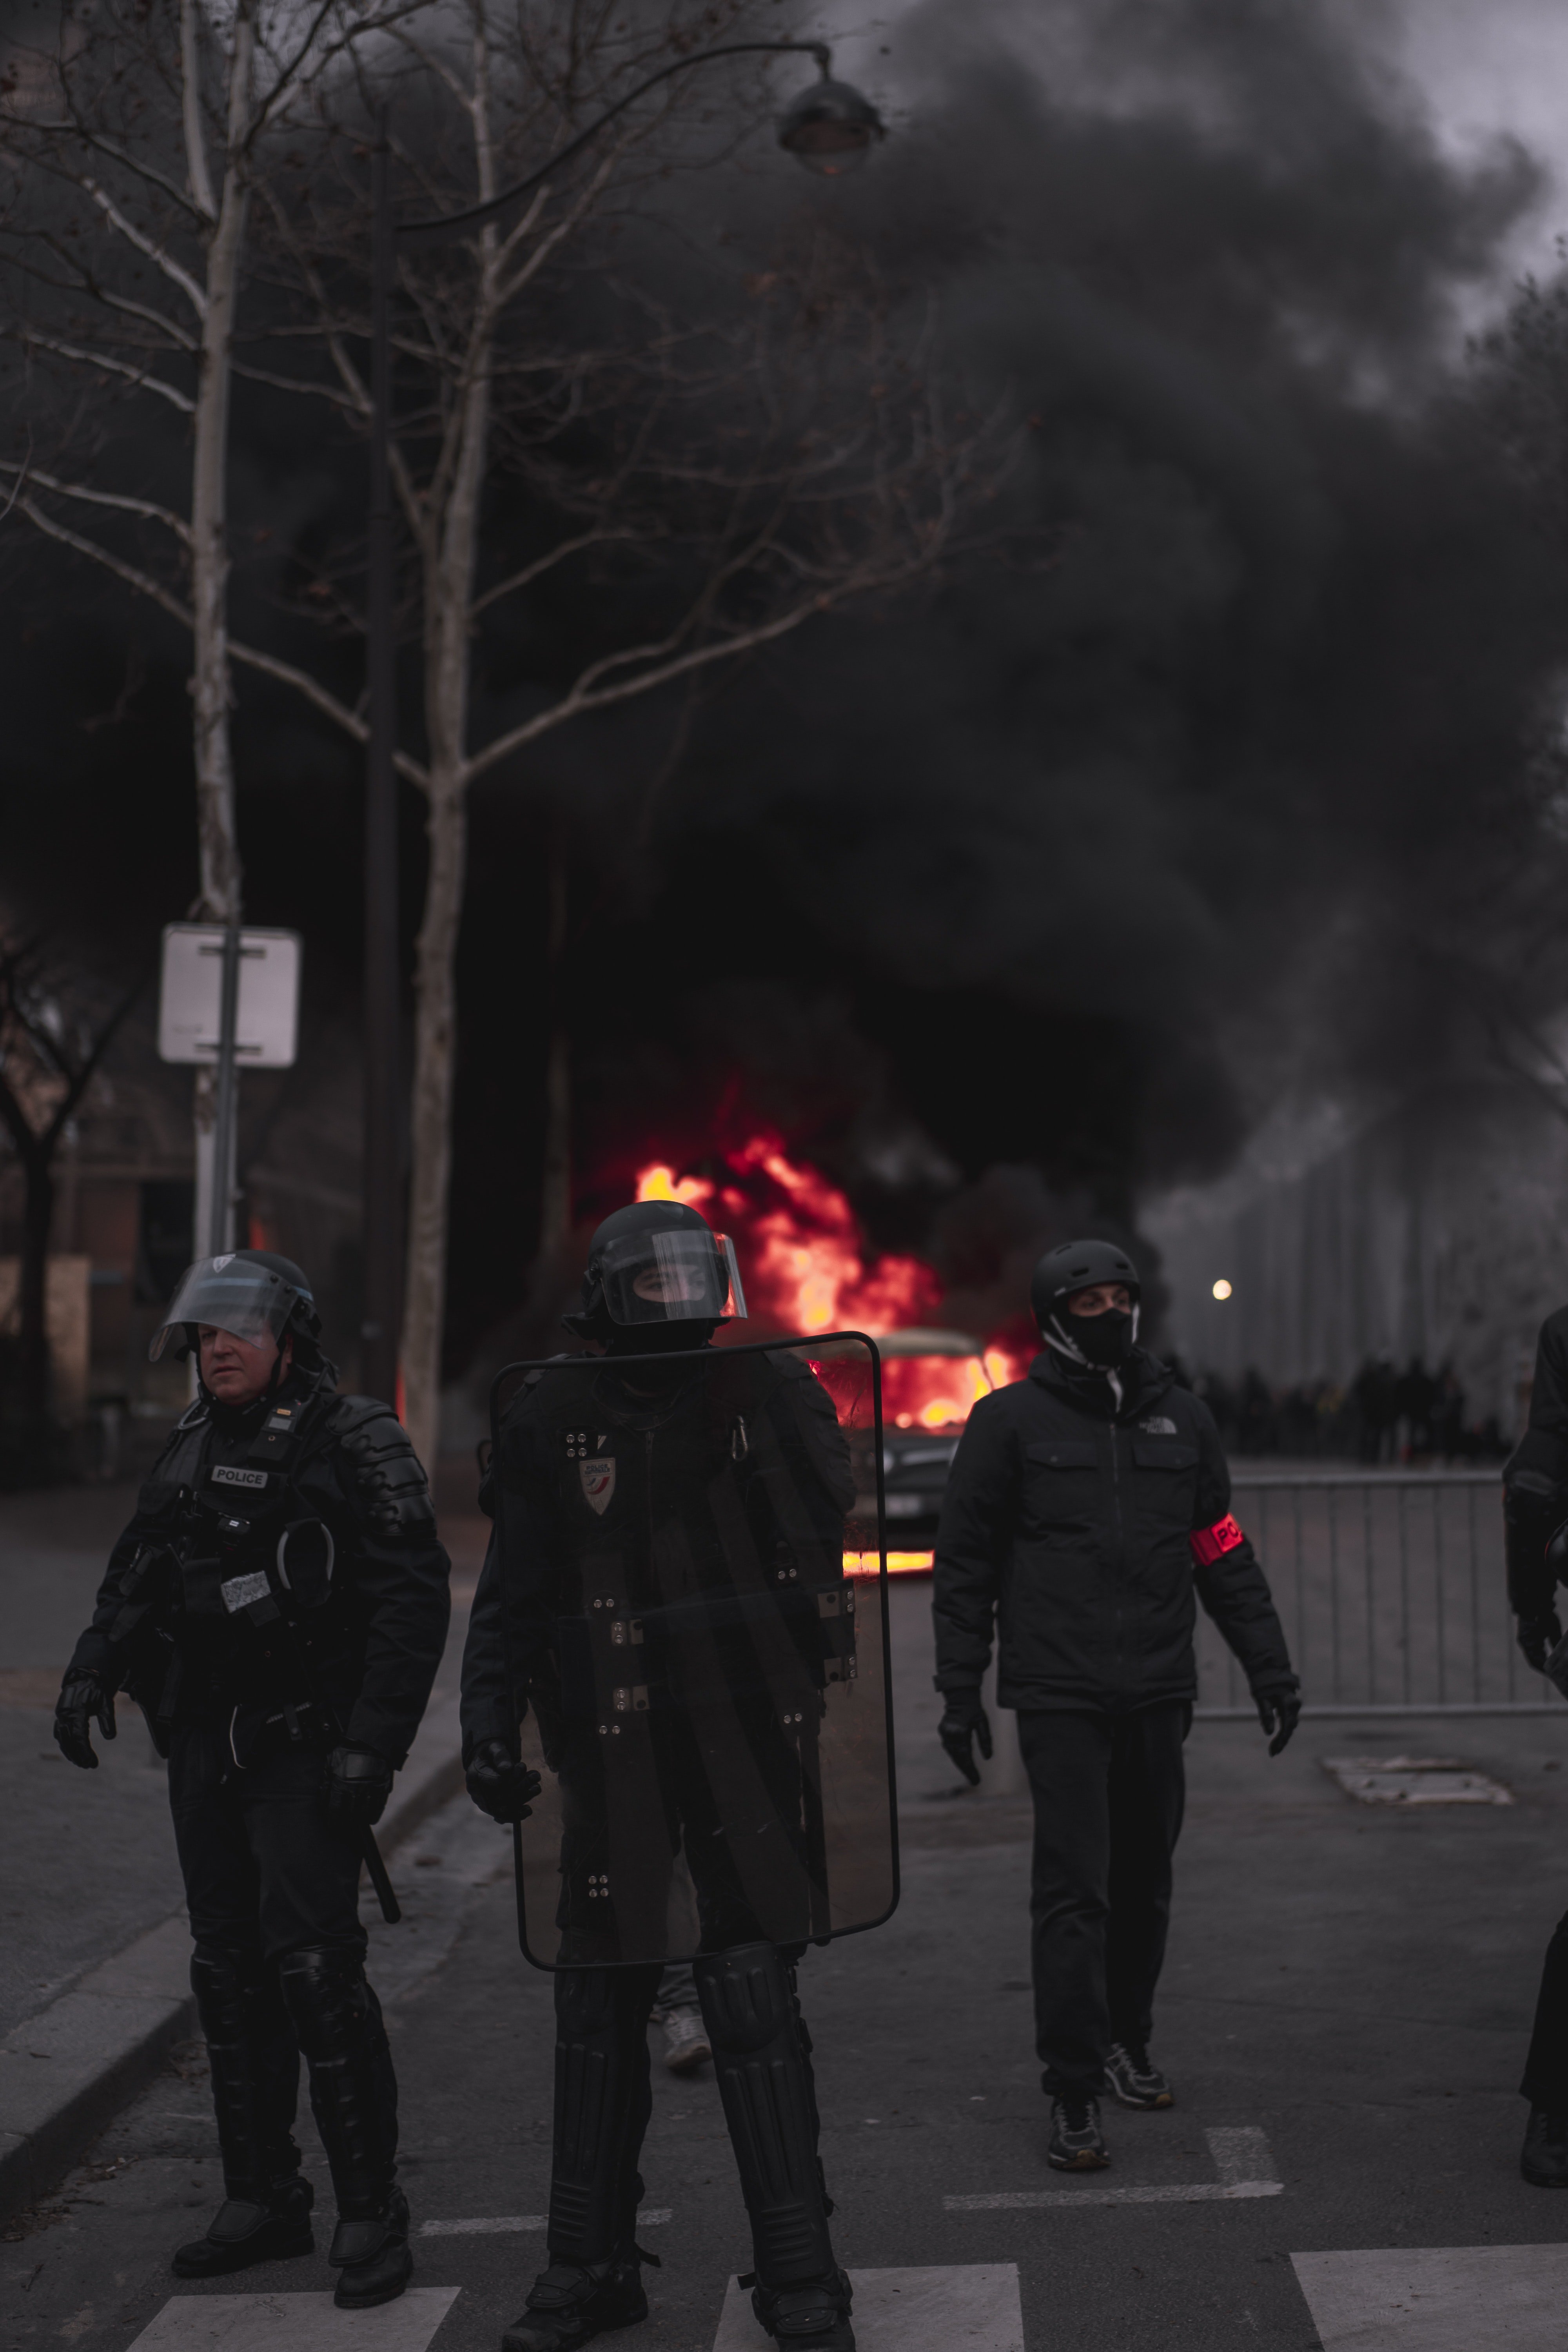 Policemen in front of a fire | Photo: Pexels